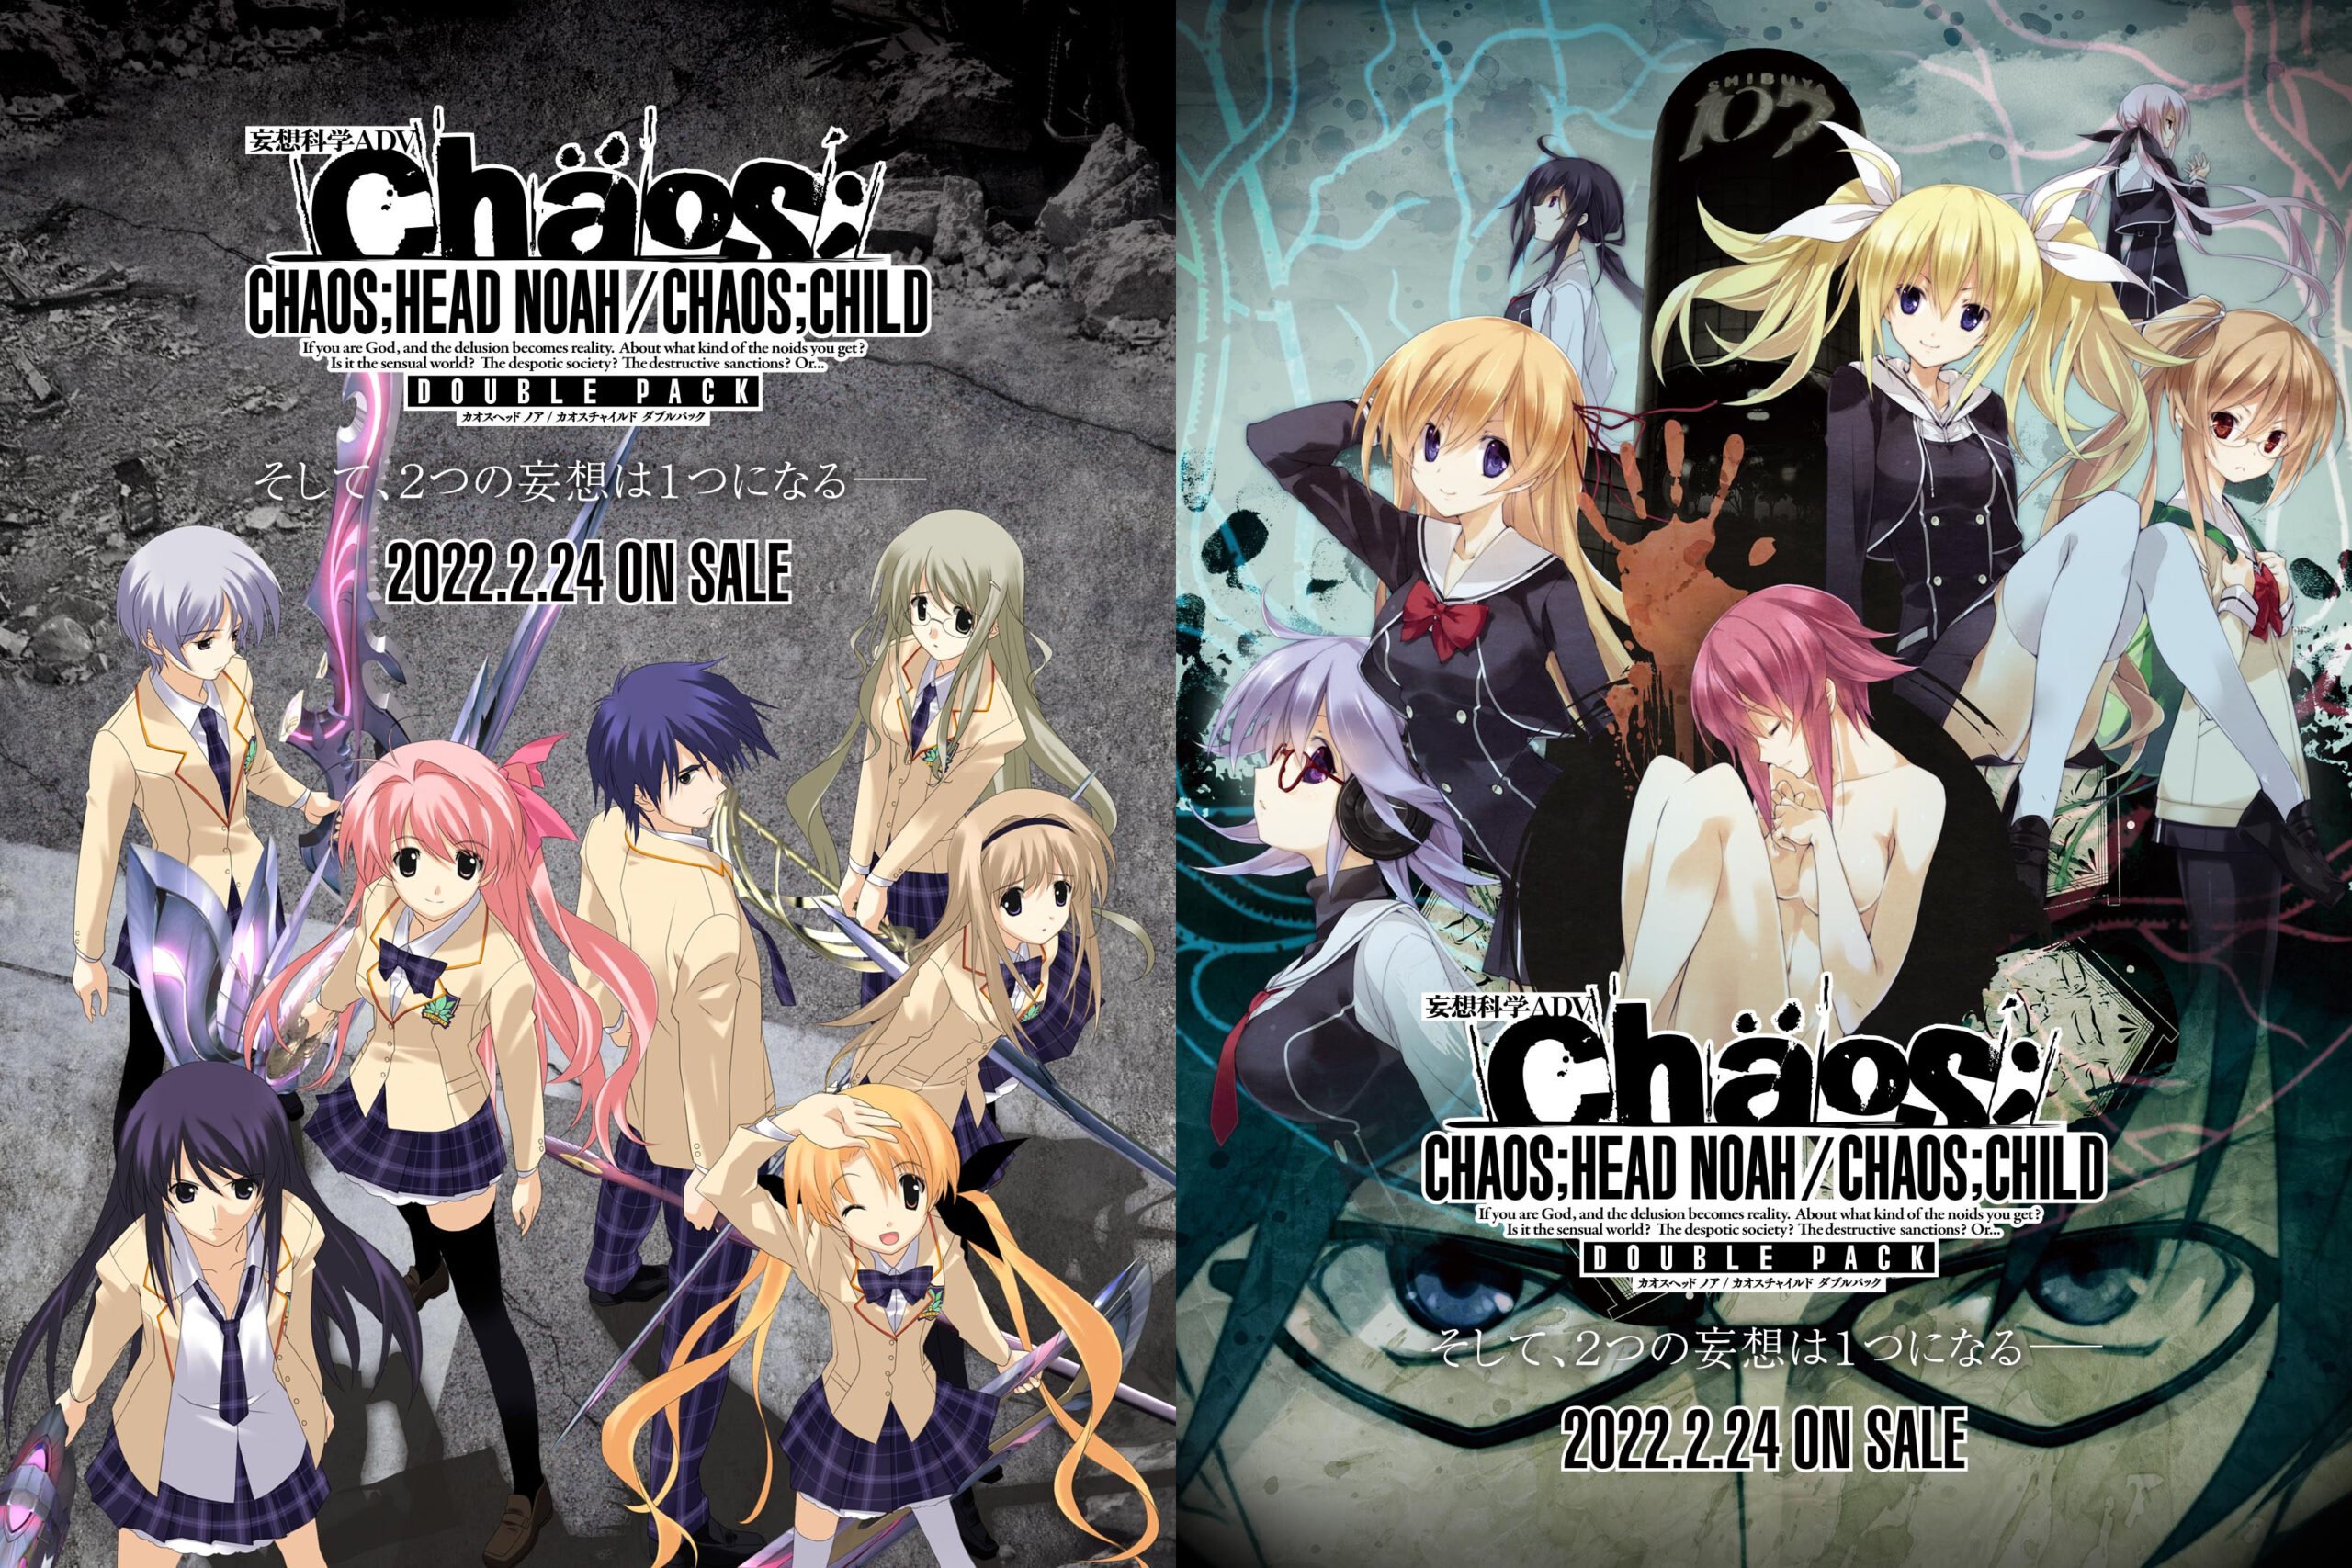 Chaos;Head Noah / Chaos;Child Double Pack announced for Switch 